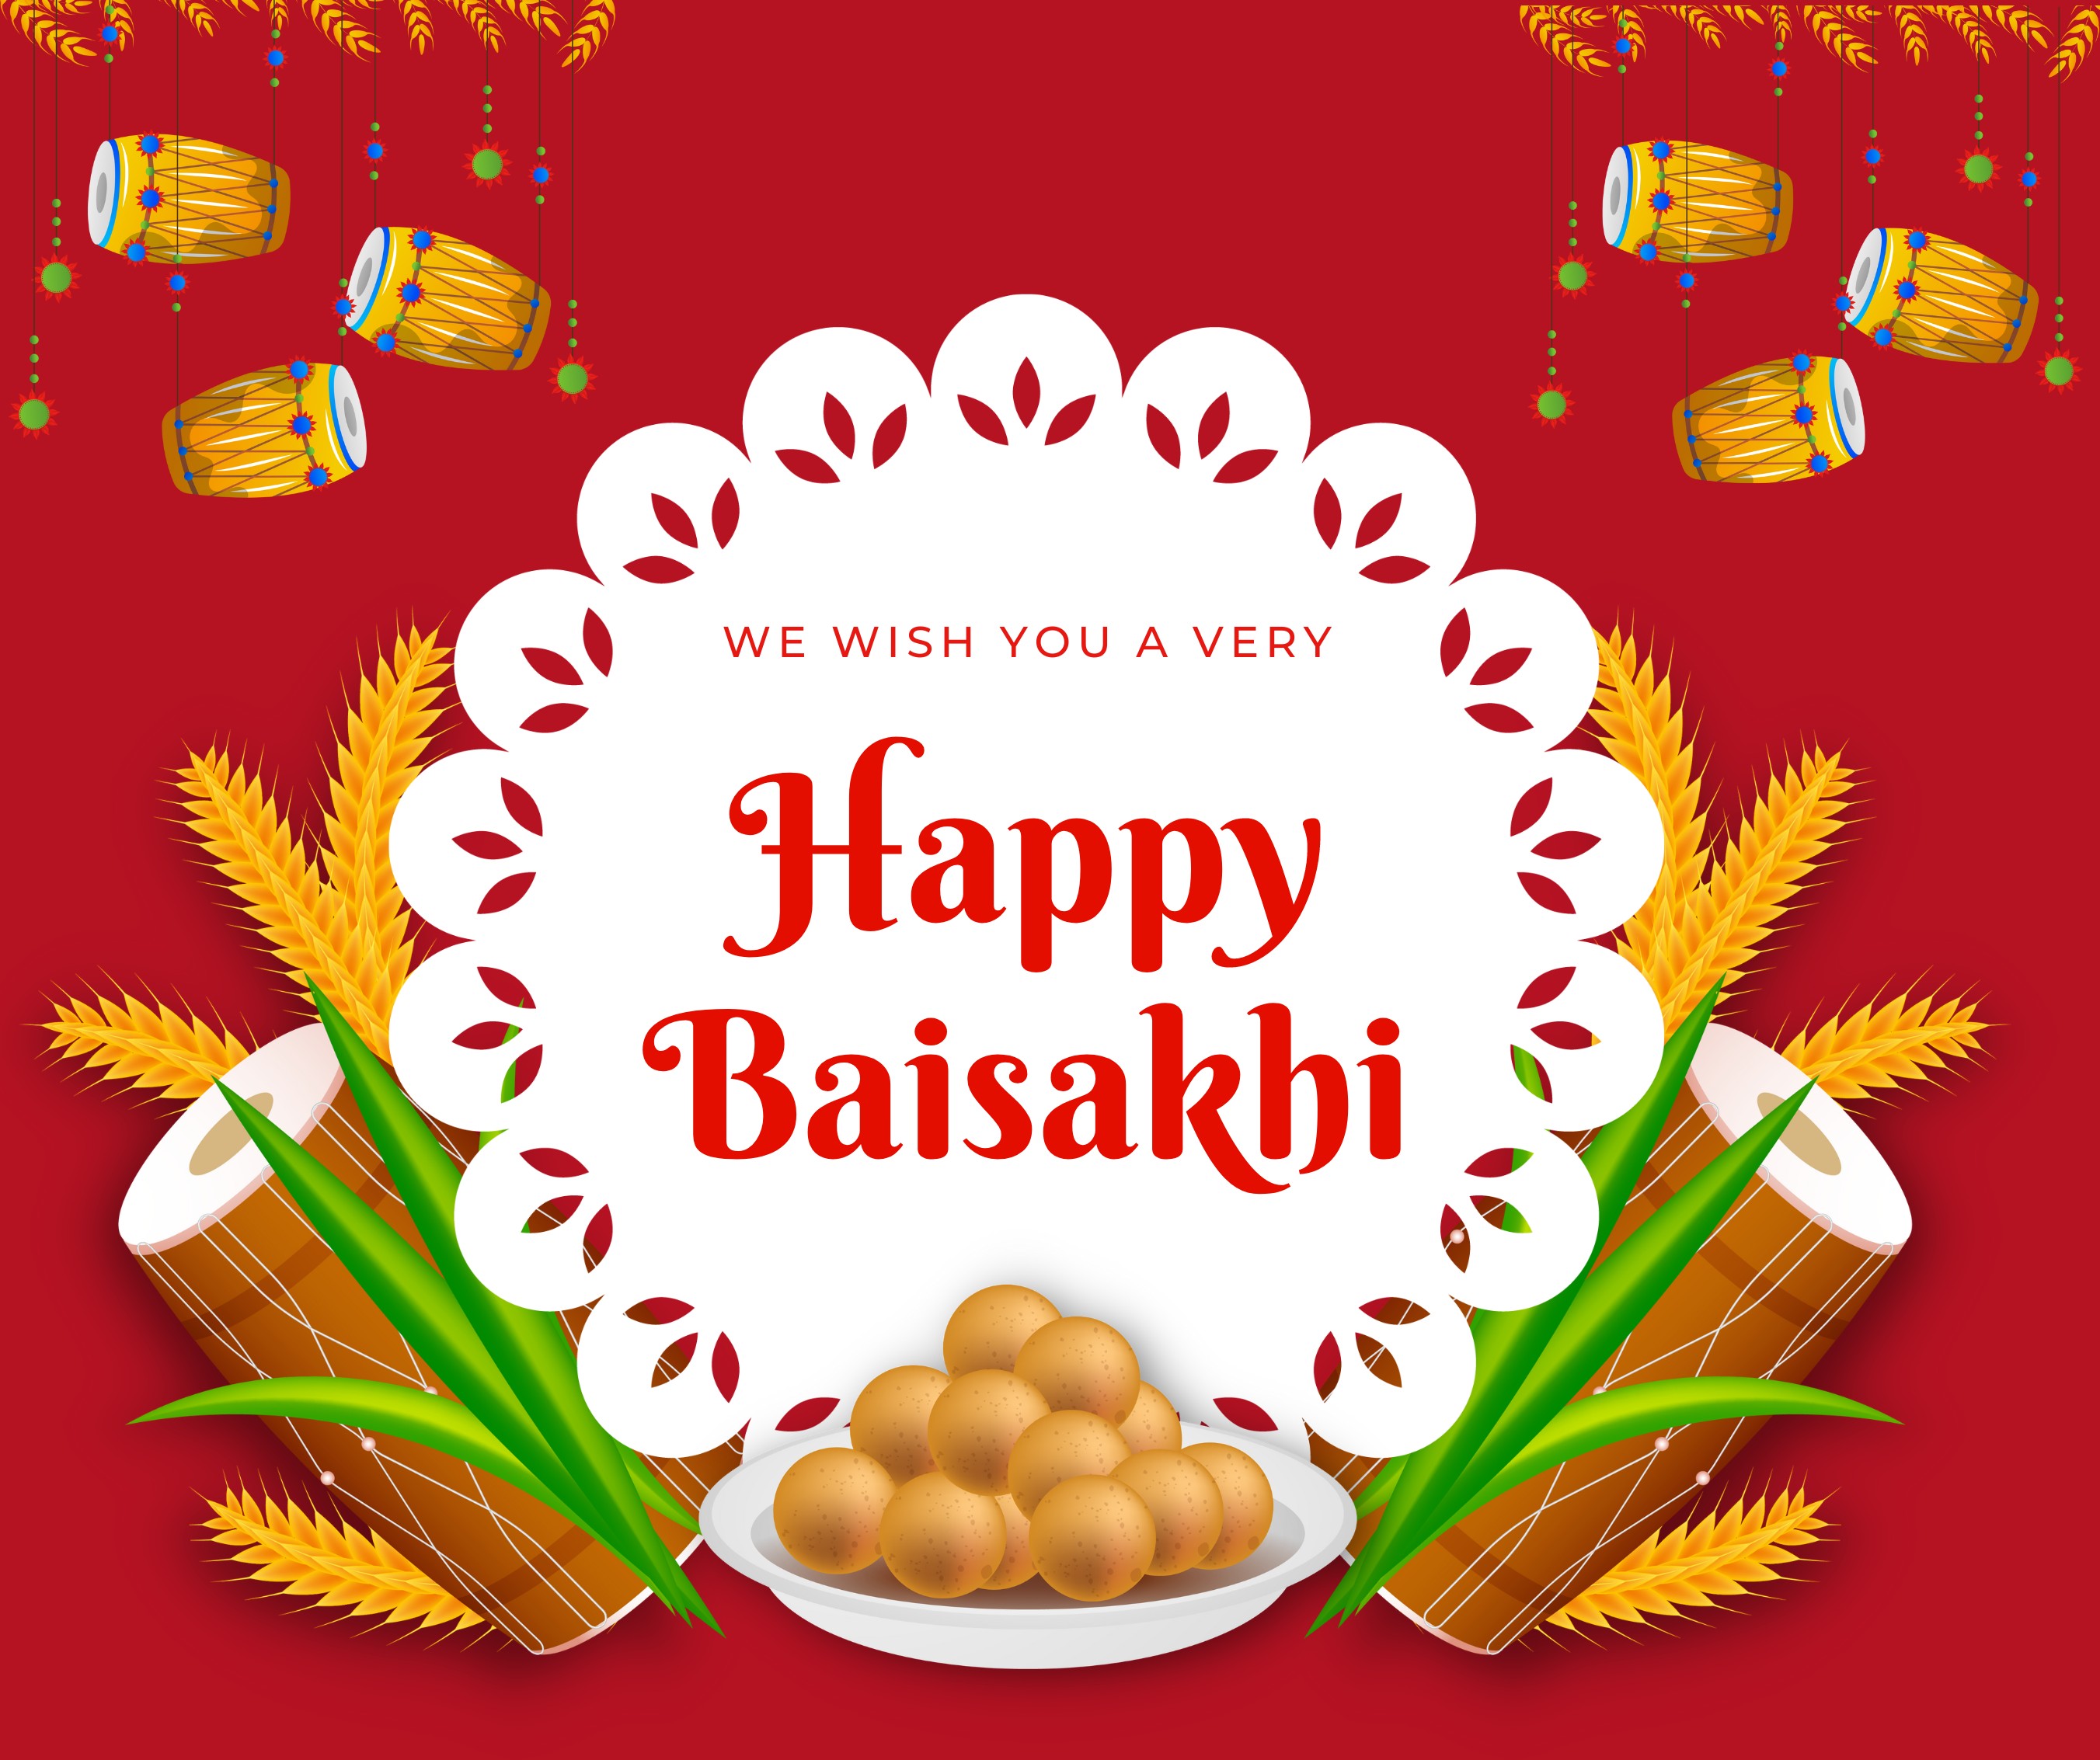 Happy Baisakhi To All Of You!